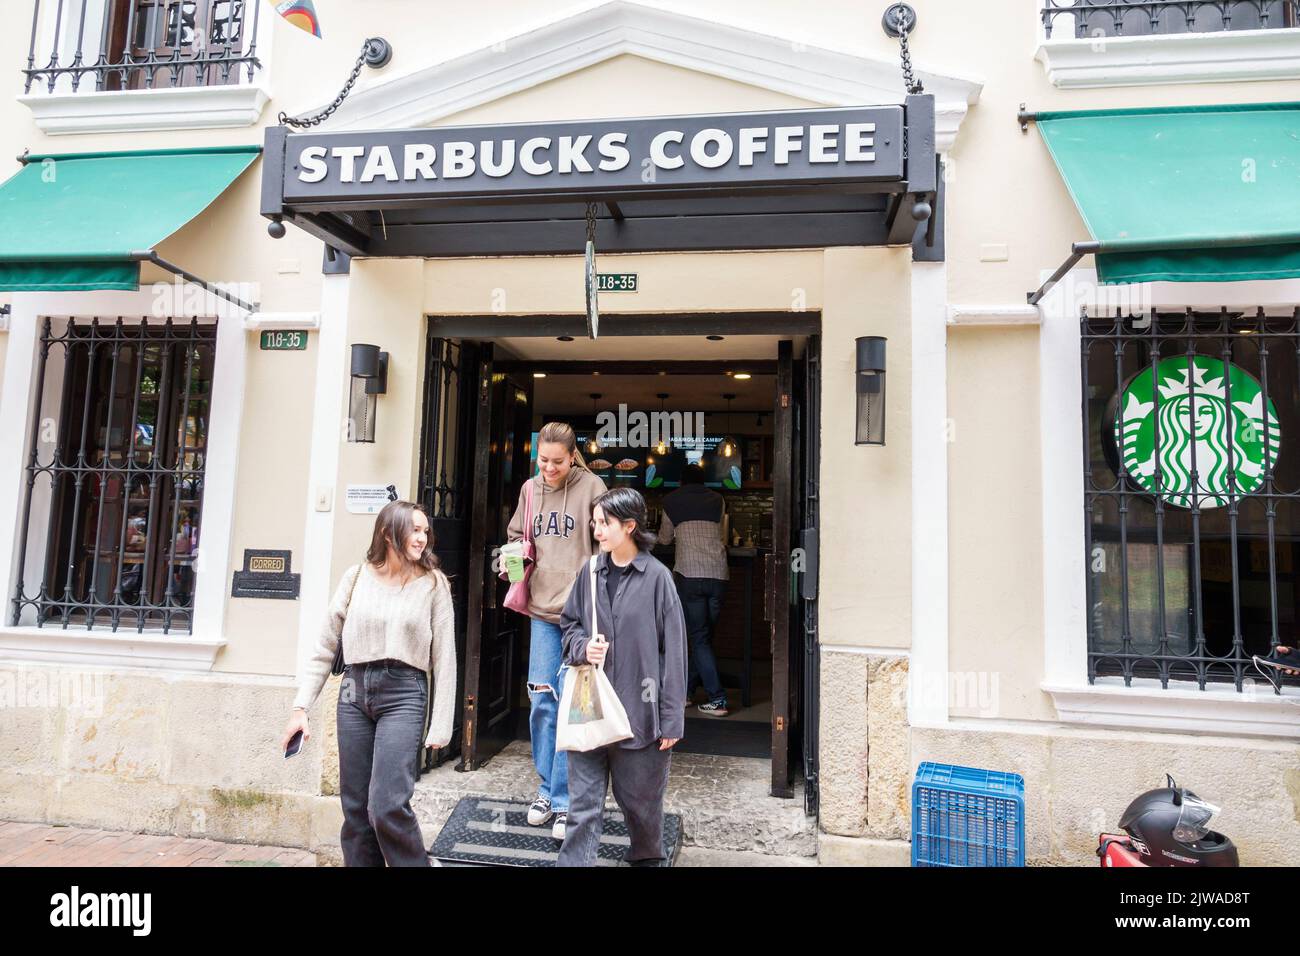 Bogota Colombia,Usaquen Carrera 6a Starbucks Coffee,restaurant restaurants dine dining eating out casual cafe cafes bistro bistros food,Colombian Colo Stock Photo